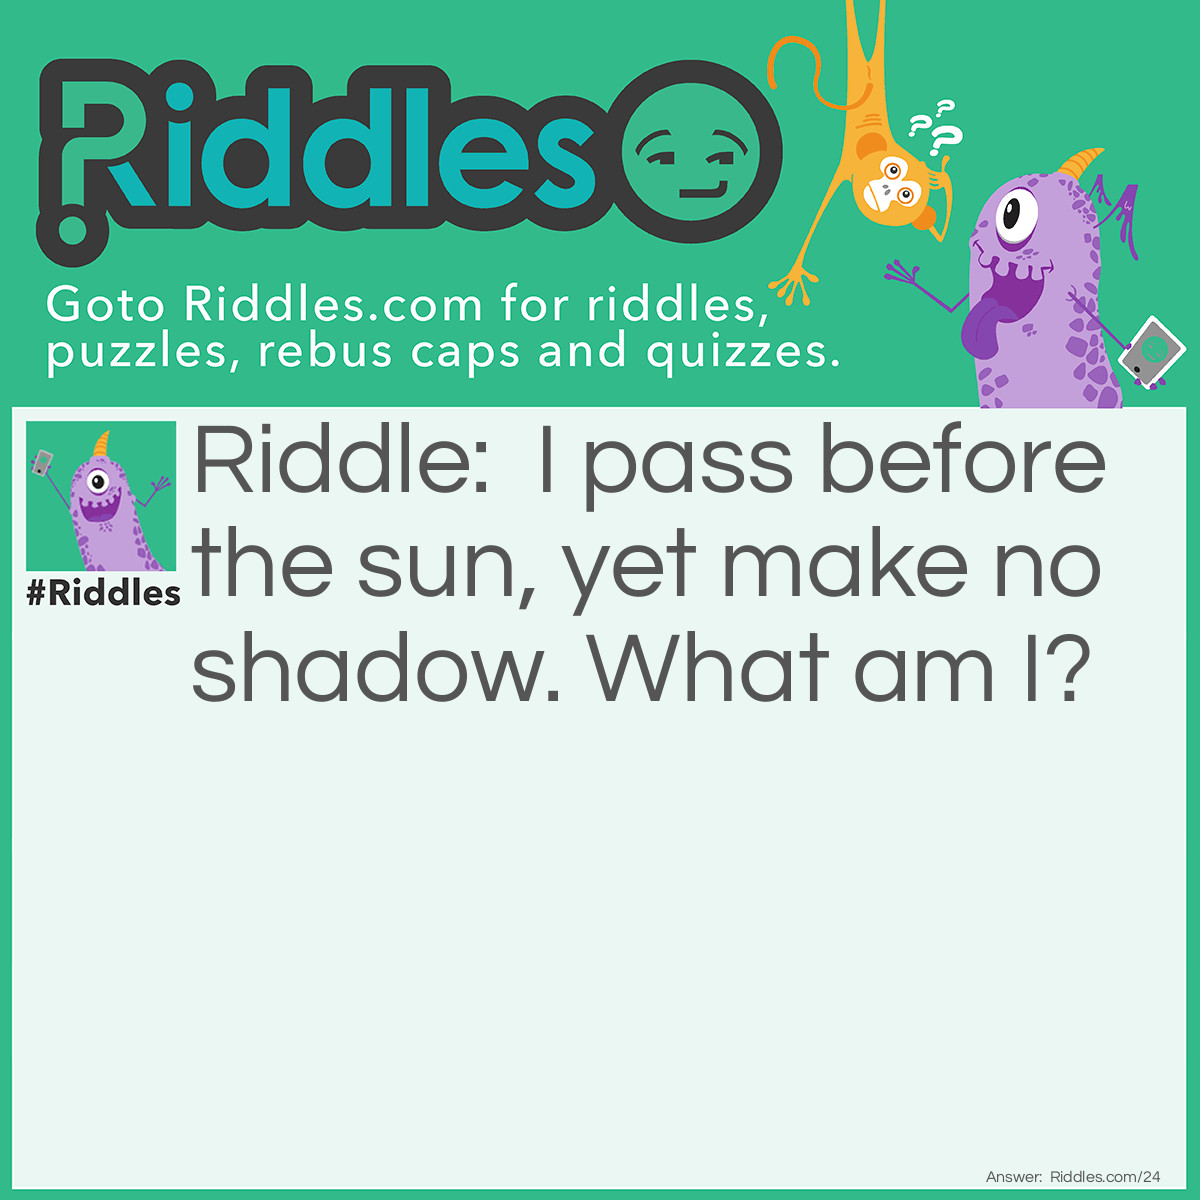 Riddle: I pass before the sun, yet make no shadow. What am I? Answer: The wind.